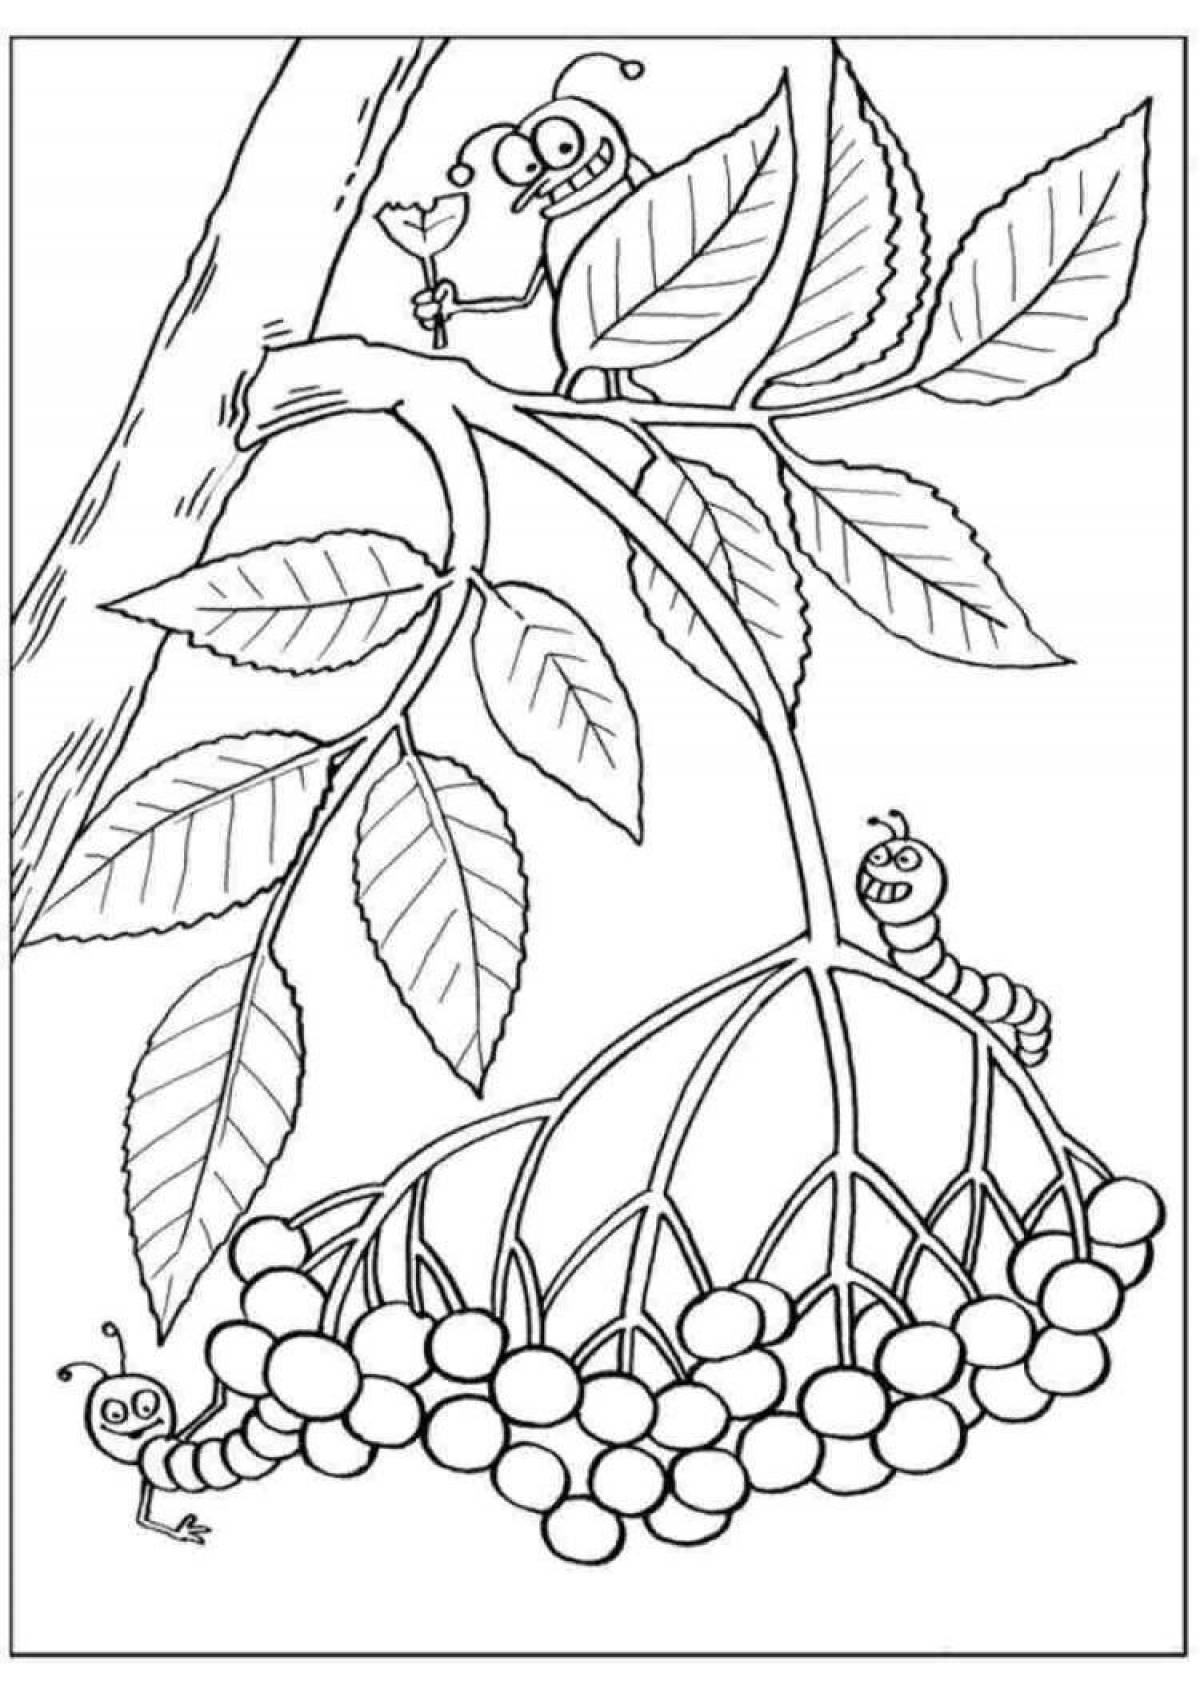 Coloring book funny pok